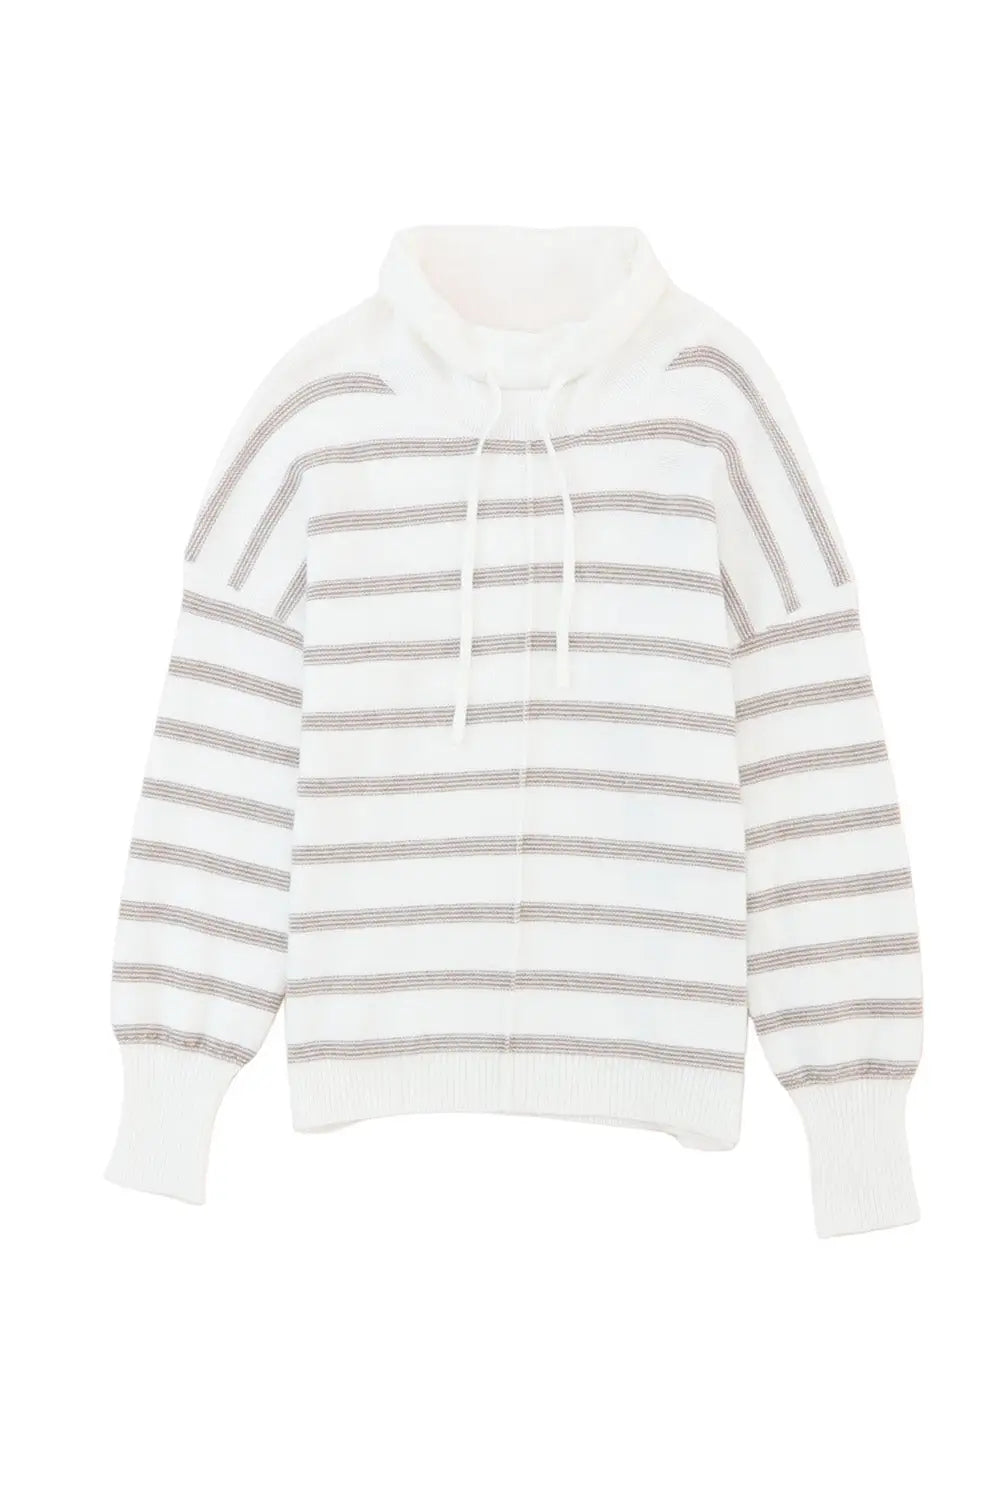 Cowl neck striped print drop shoulder sweater - sweaters & cardigans